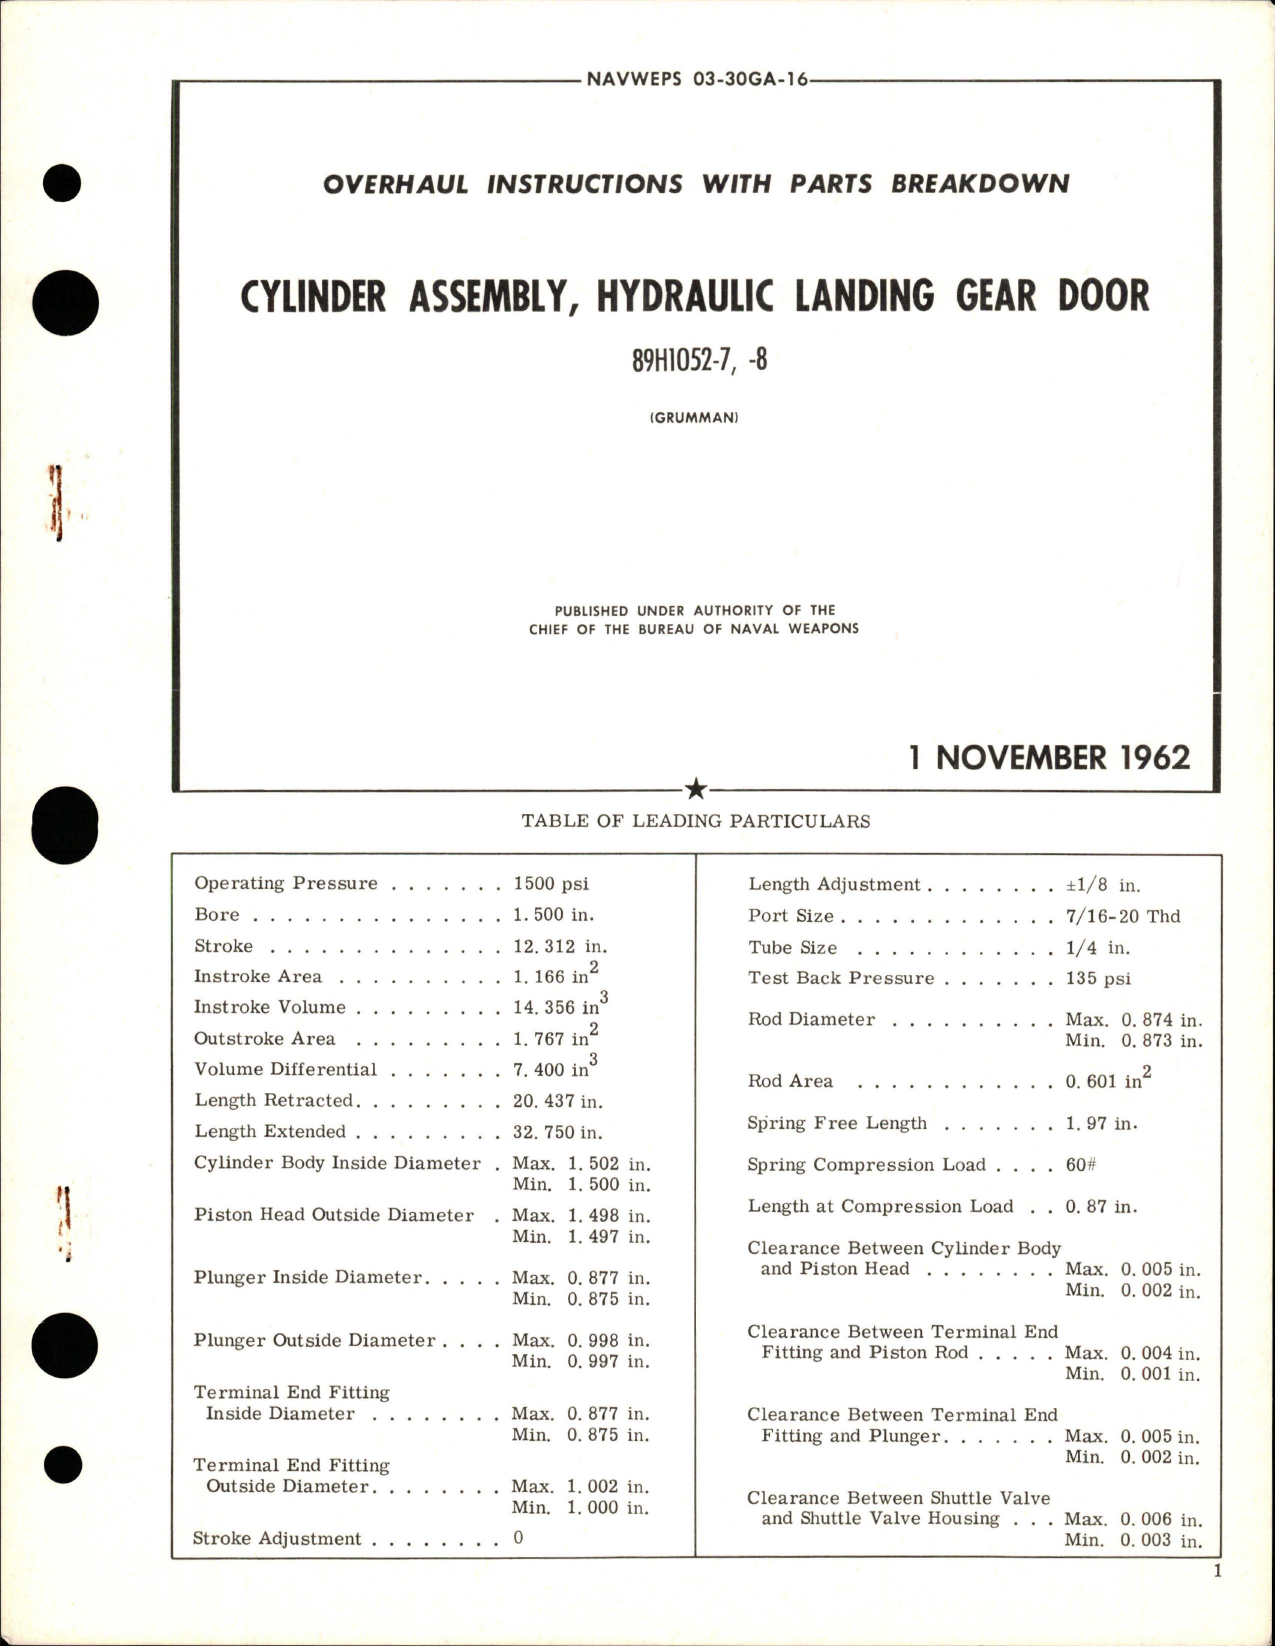 Sample page 1 from AirCorps Library document: Overhaul Instructions with Parts Breakdown for Hydraulic Landing Gear Door Cylinder Assembly - 89H1052-7 and 89H1052-8